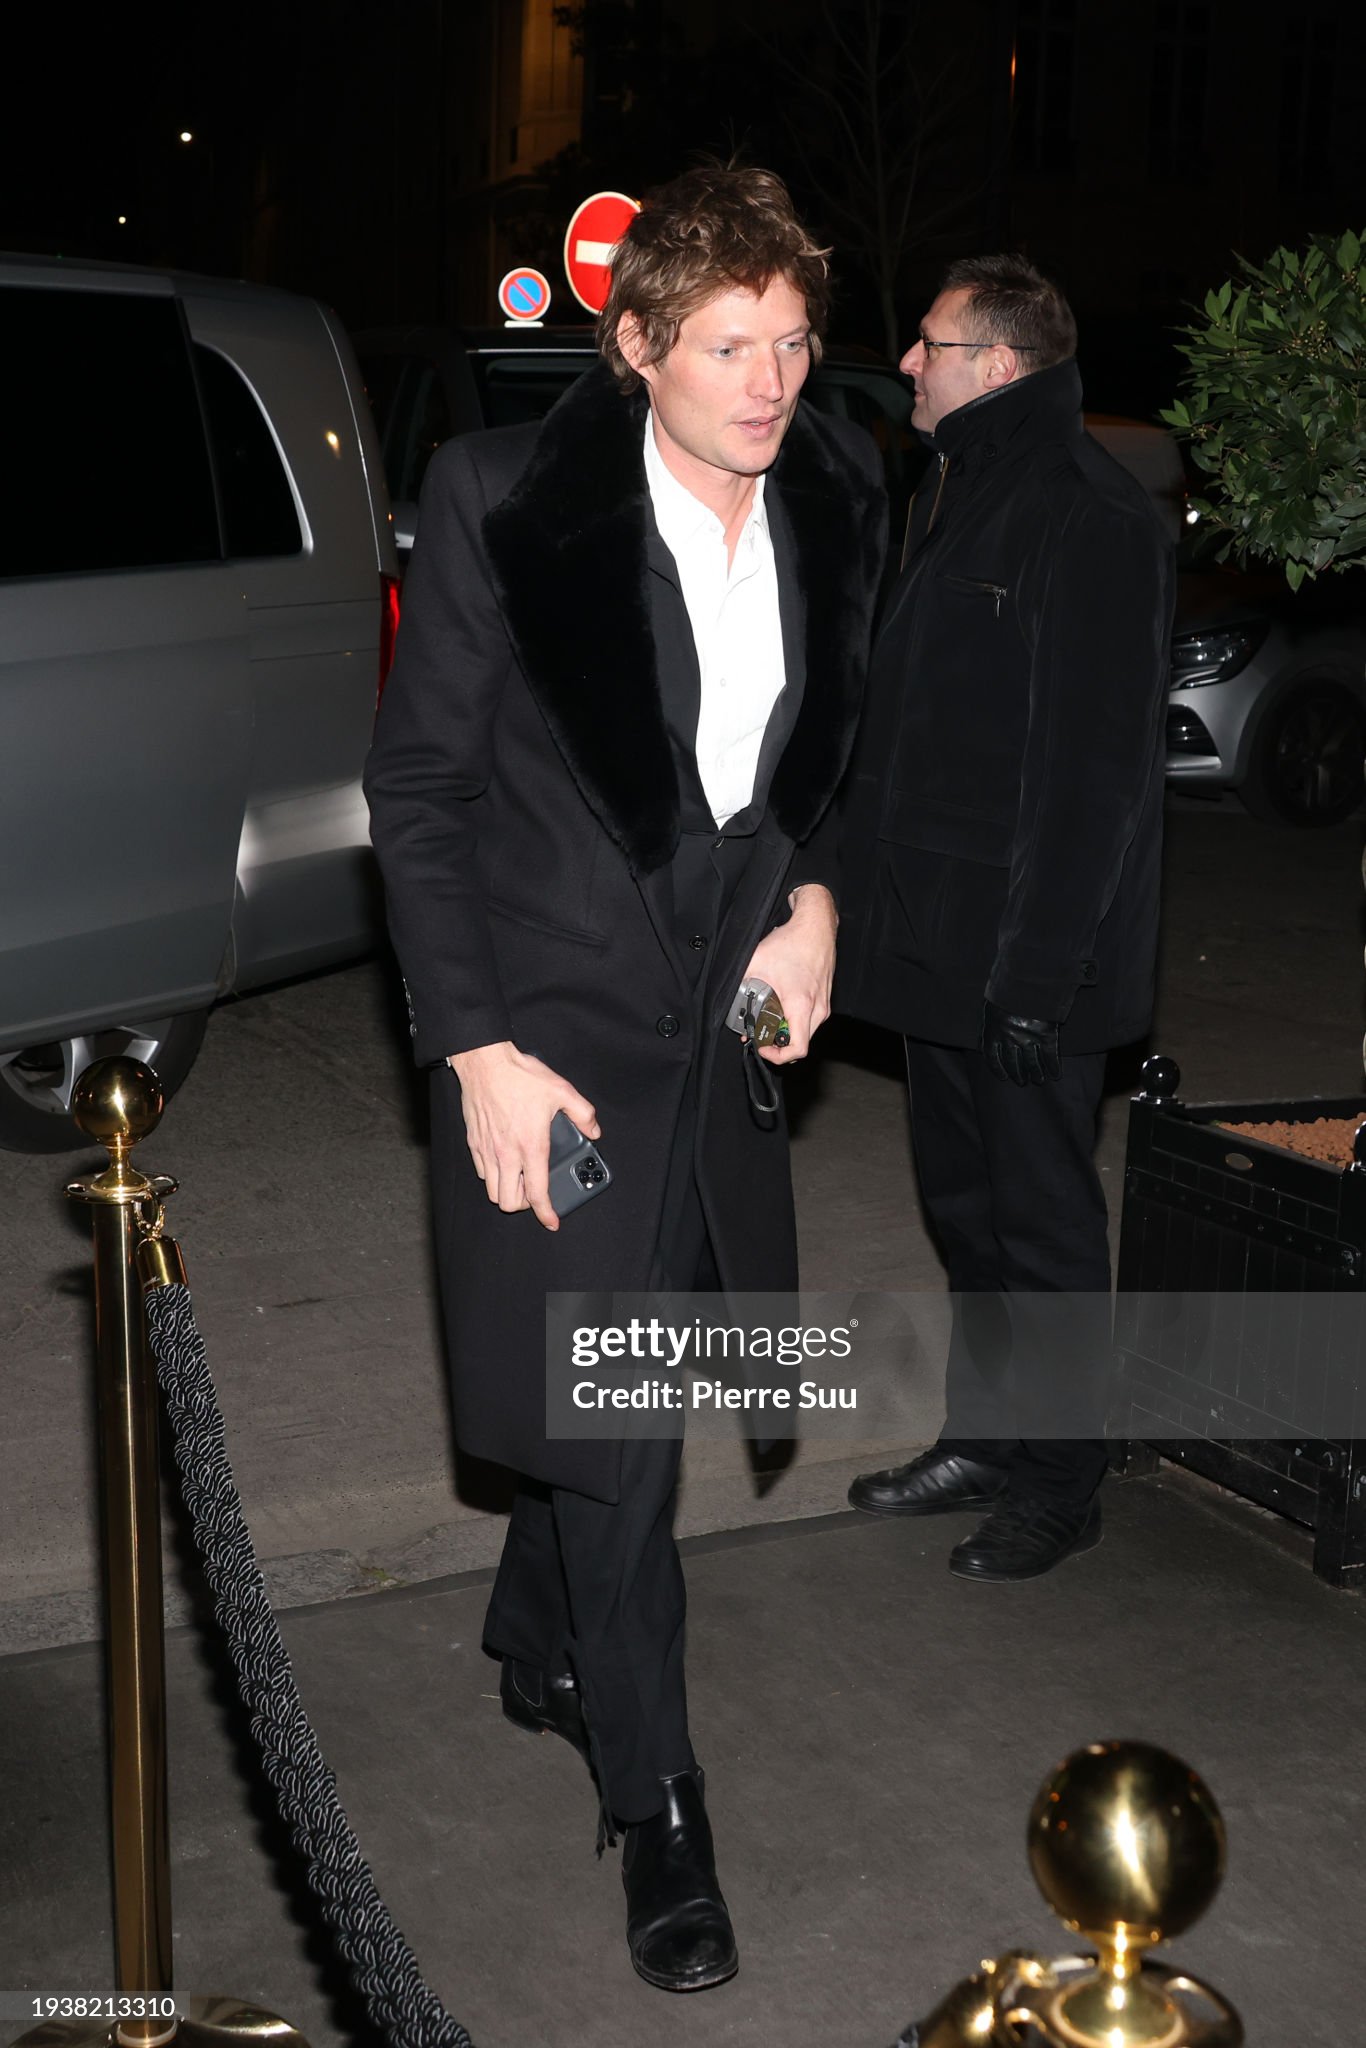 https://media.gettyimages.com/id/1938213310/photo/kate-moss-friends-arrive-at-laurent-restaurant-to-celebrate-kates-5oth-anniversary.jpg?s=2048x2048&w=gi&k=20&c=v5-BdMmFoBLy_3lwQTh3dUI3e18bsbk_GGusS6ldPTo=